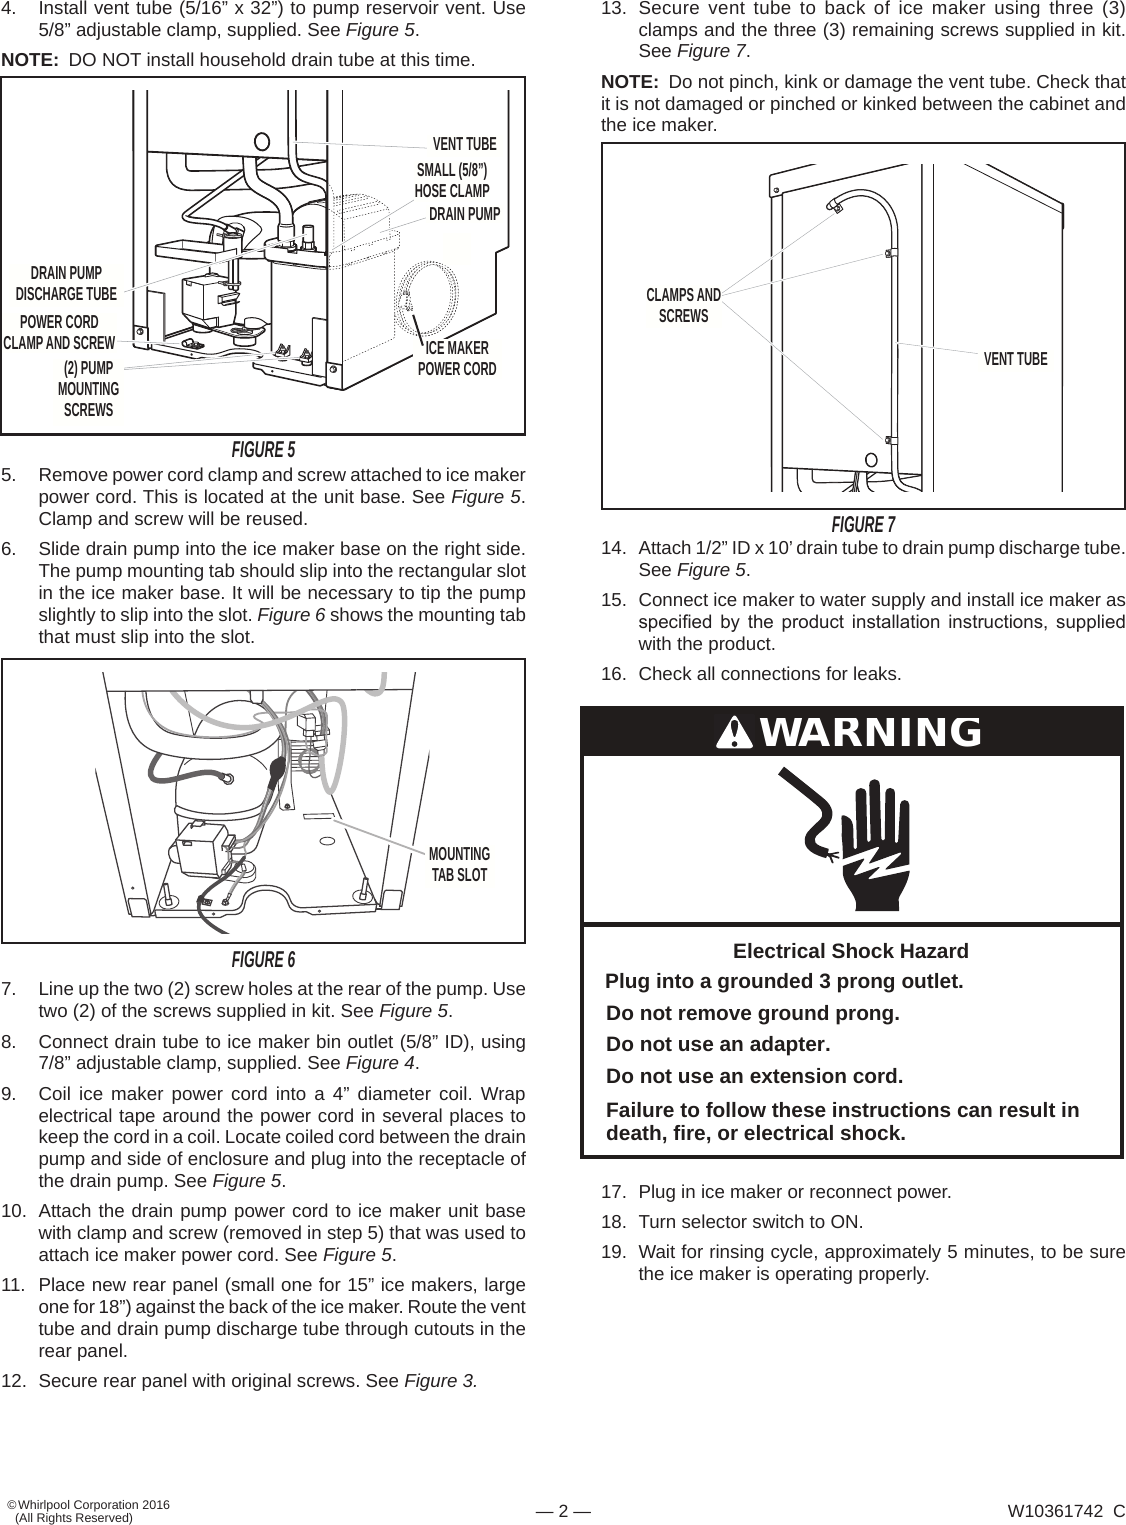 Page 2 of 2 - Whirlpool GI15NDXZS1 W10361742C User Manual  ICE MAKER - Manuals And Guides 1702134L